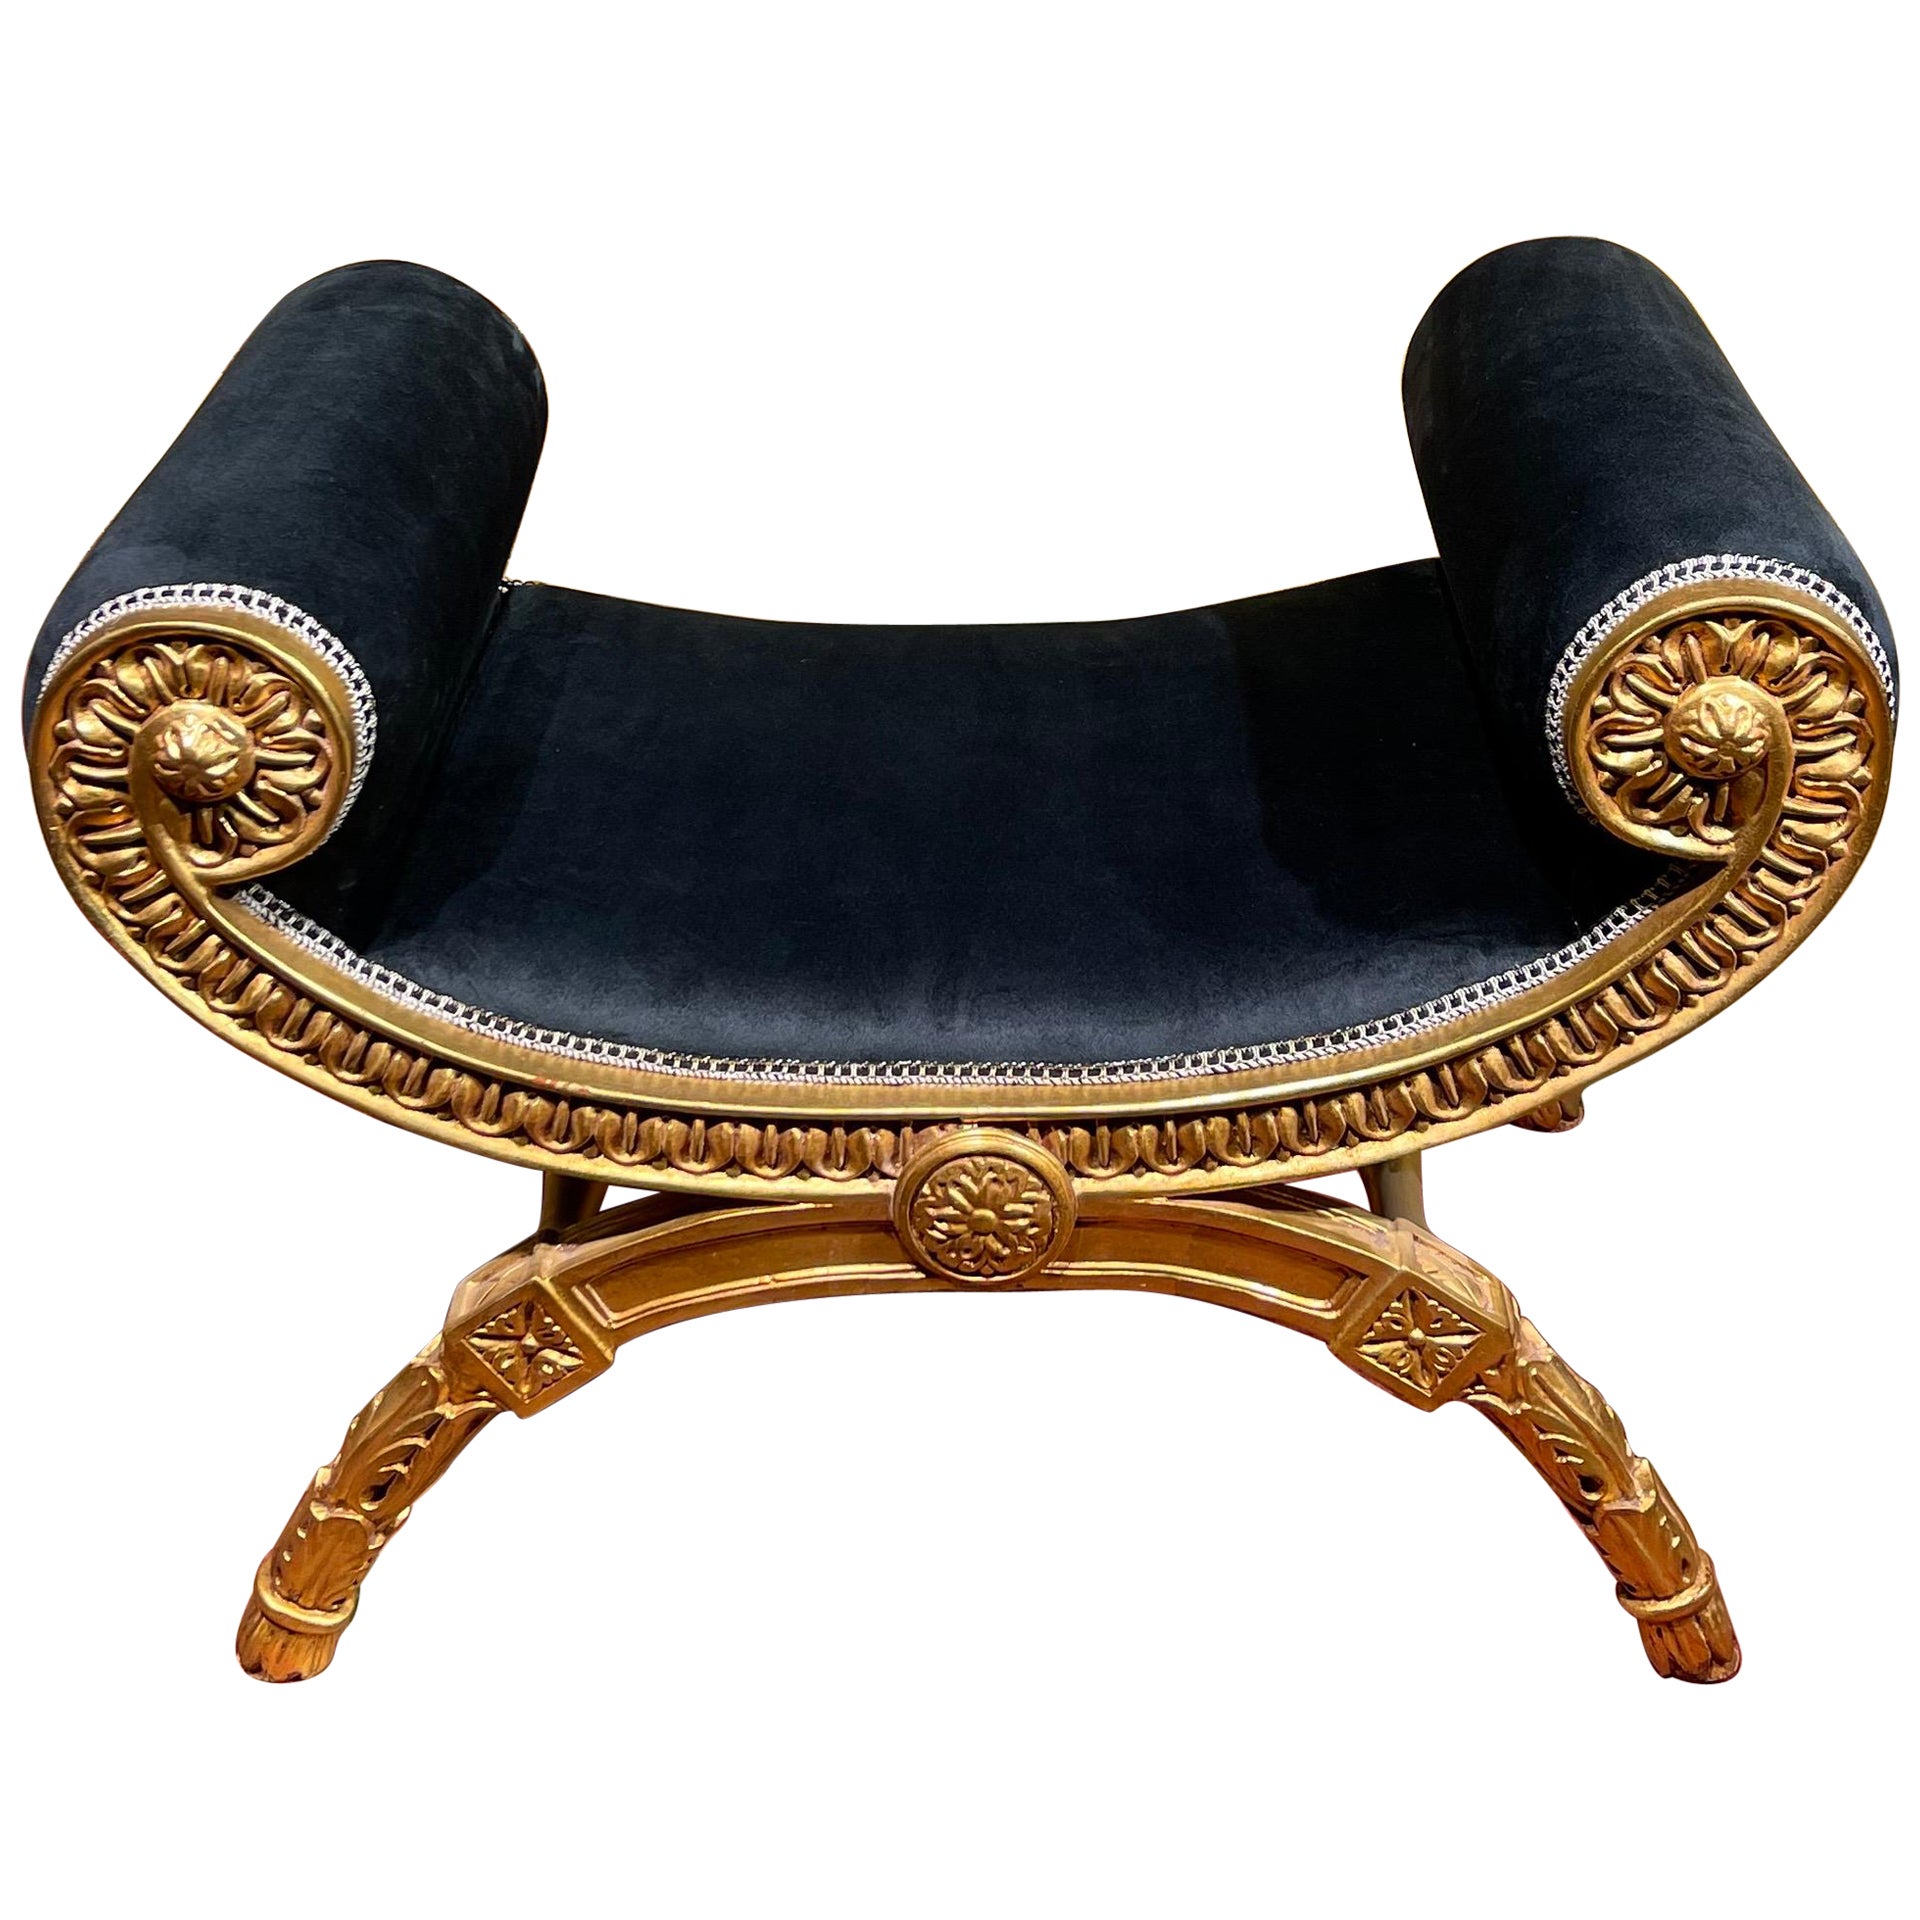 Exceptional French Bench, Stool, Gondola in Empire